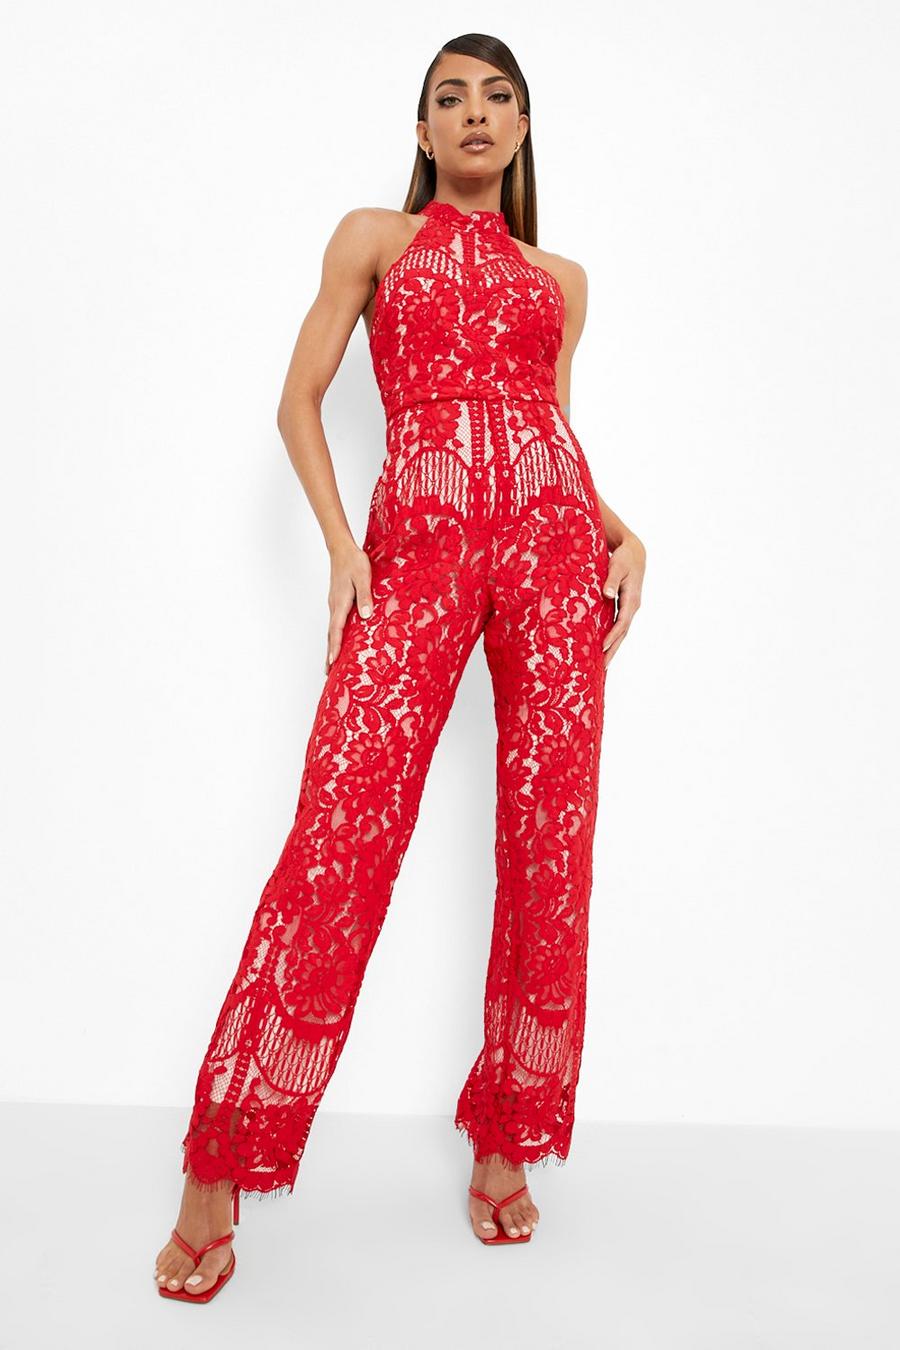 Red Lace Halter Sleeveless Jumpsuit